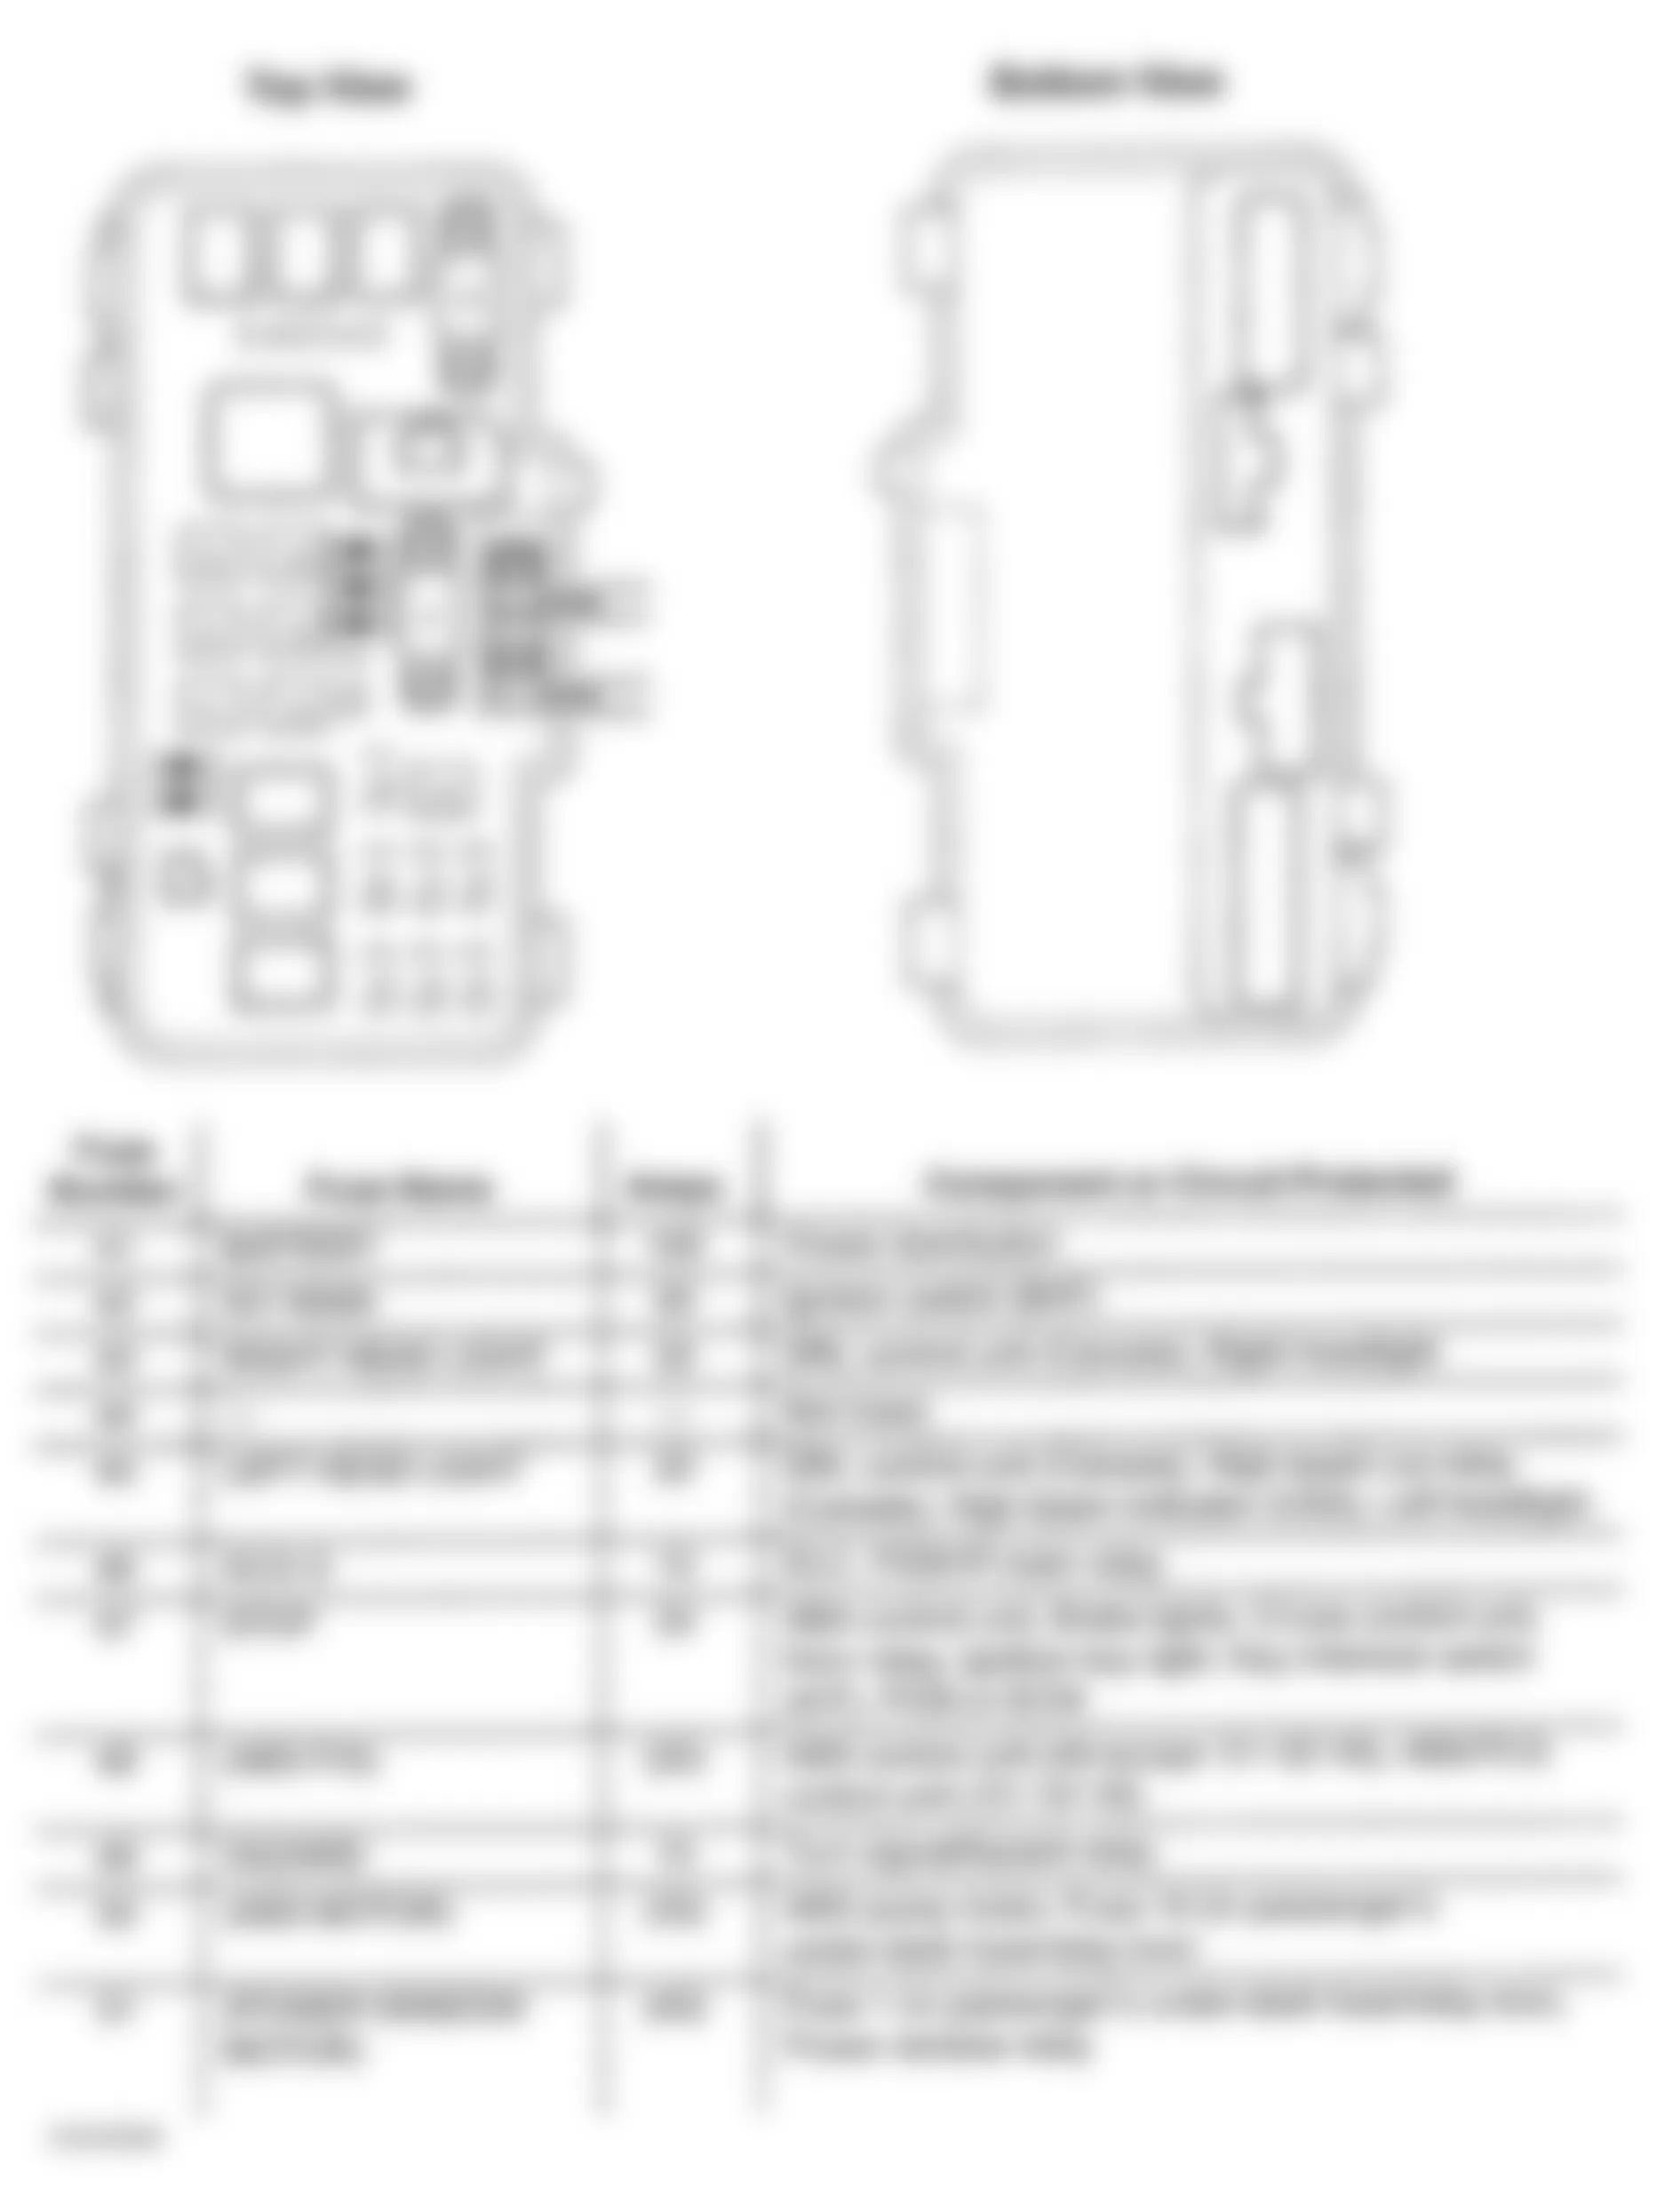 Honda Accord SE 2002 - Component Locations -  Identifying Under-Hood Fuse/Relay Box Components (1 Of 2)